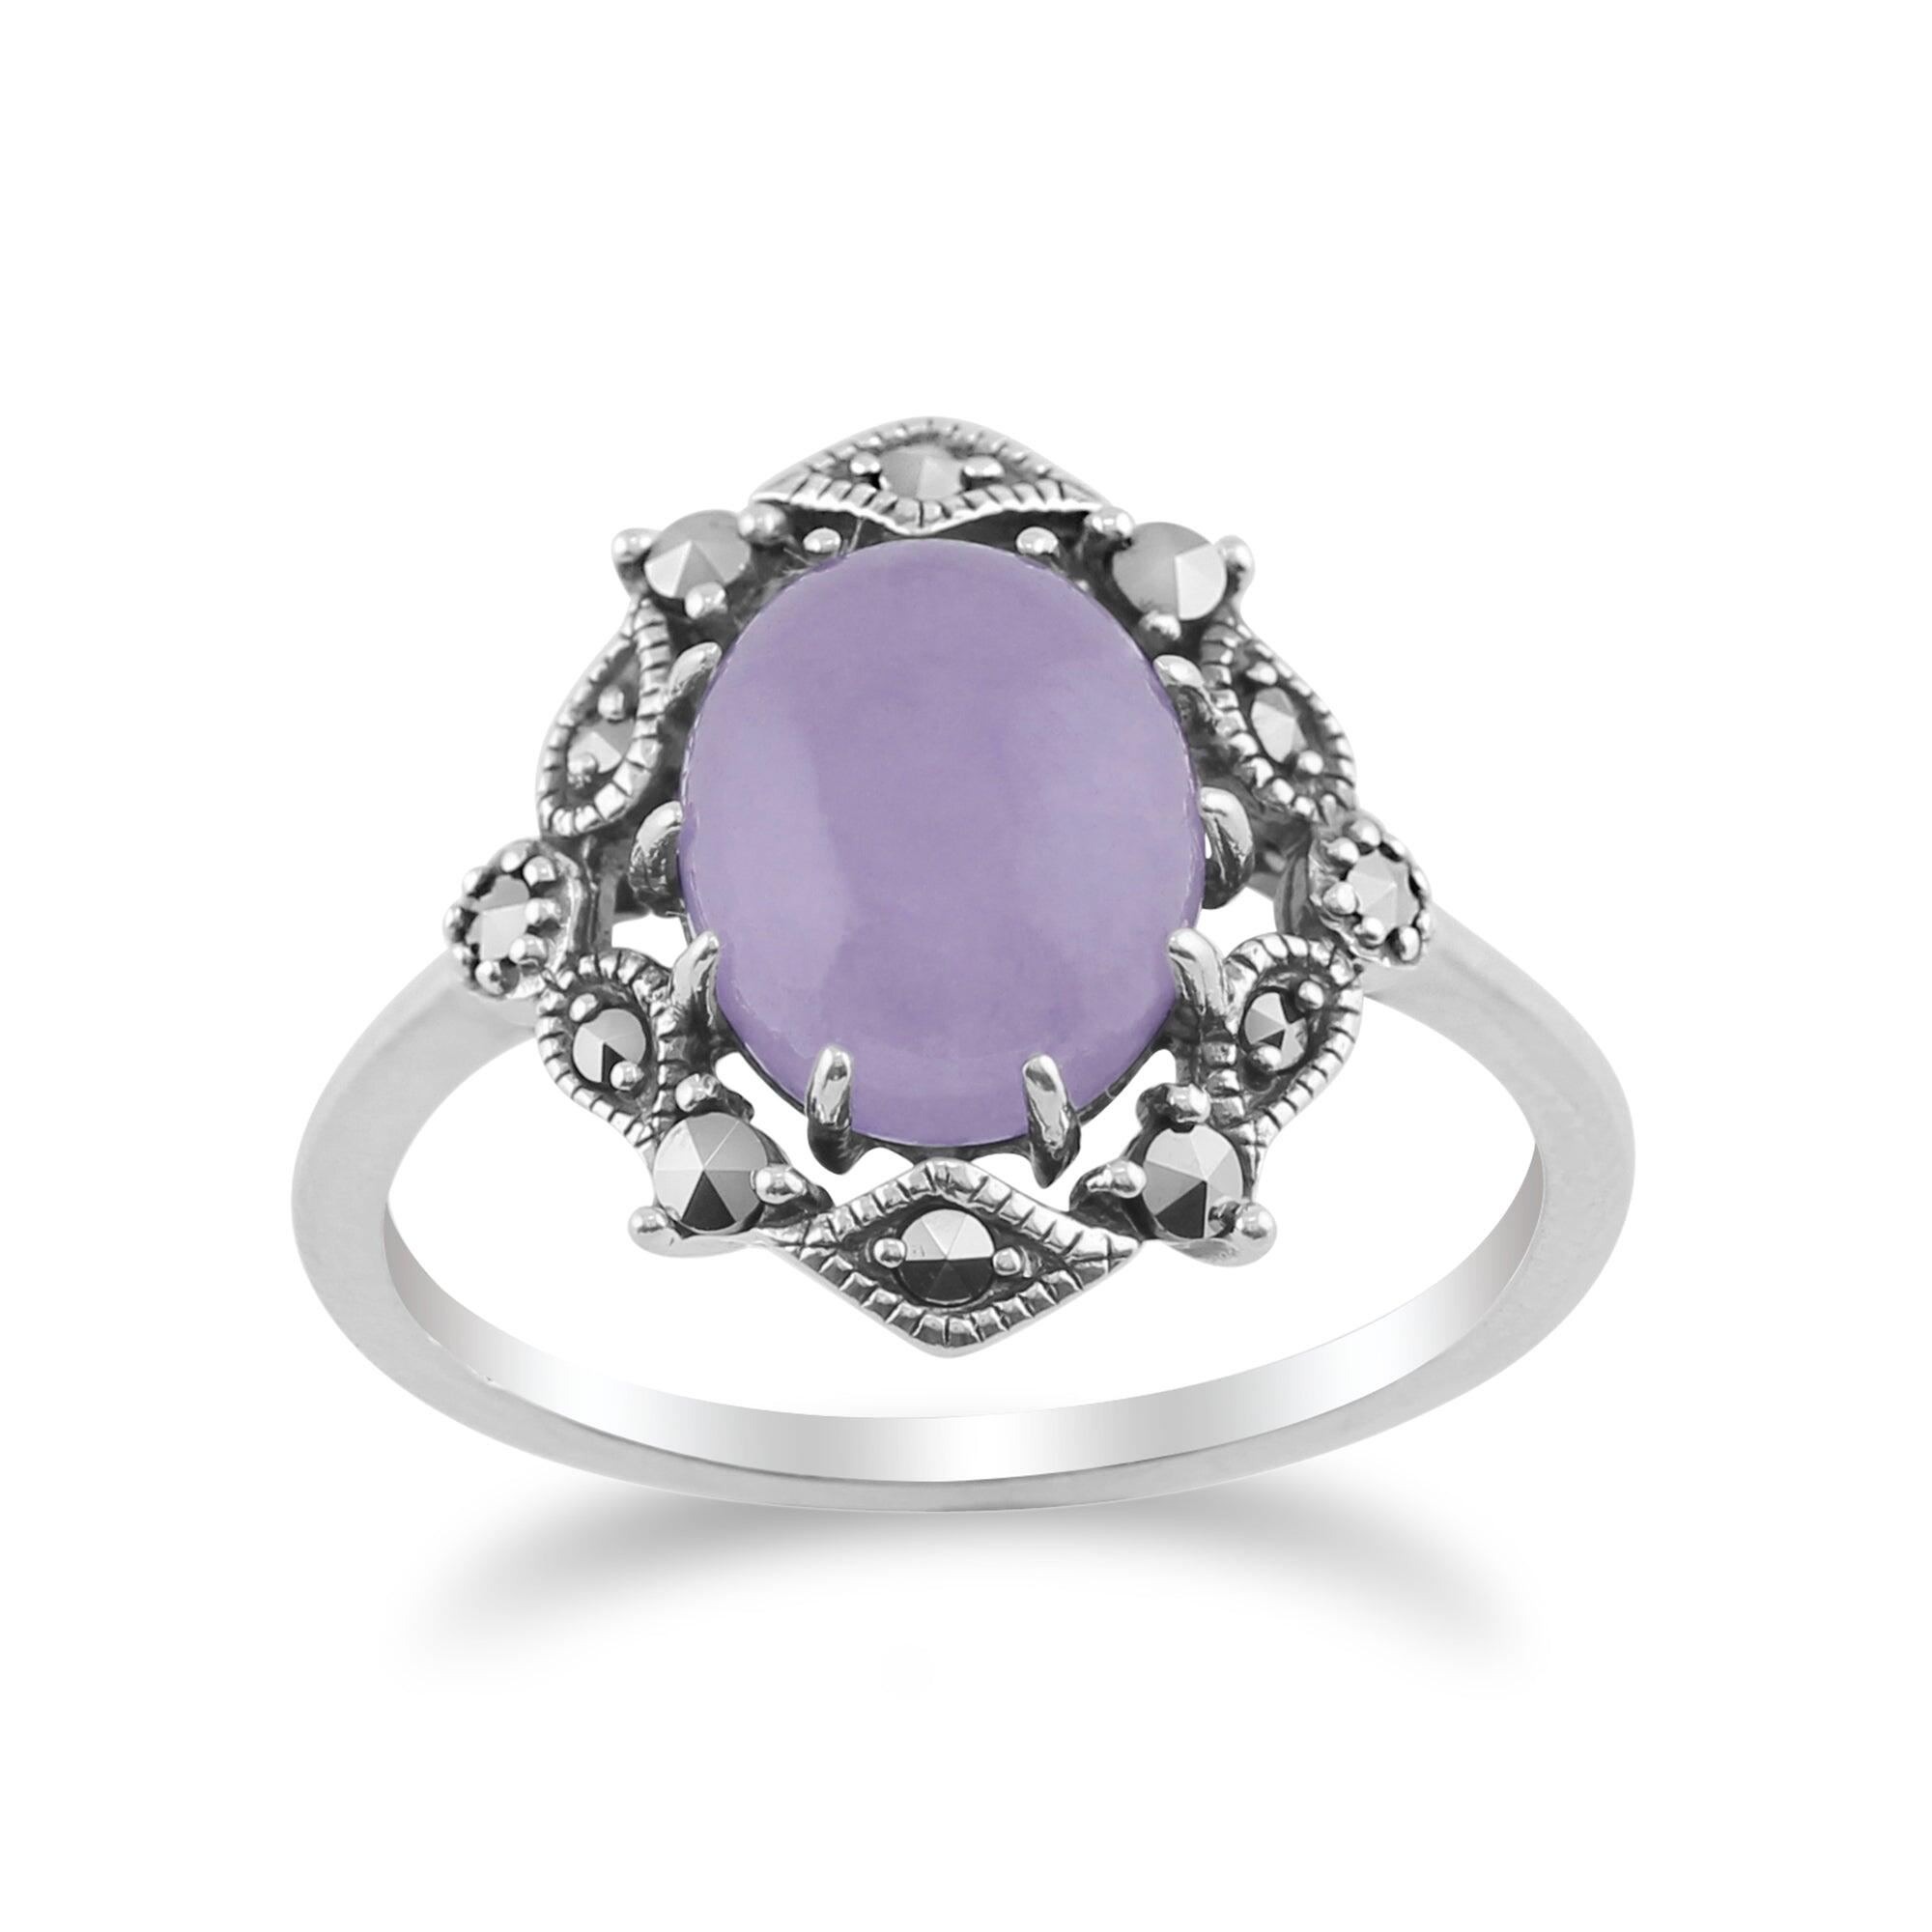 Art Nouveau Style Oval Lavender Jade Cabochon & Marcasite Statement Ring in 925 Sterling Silver